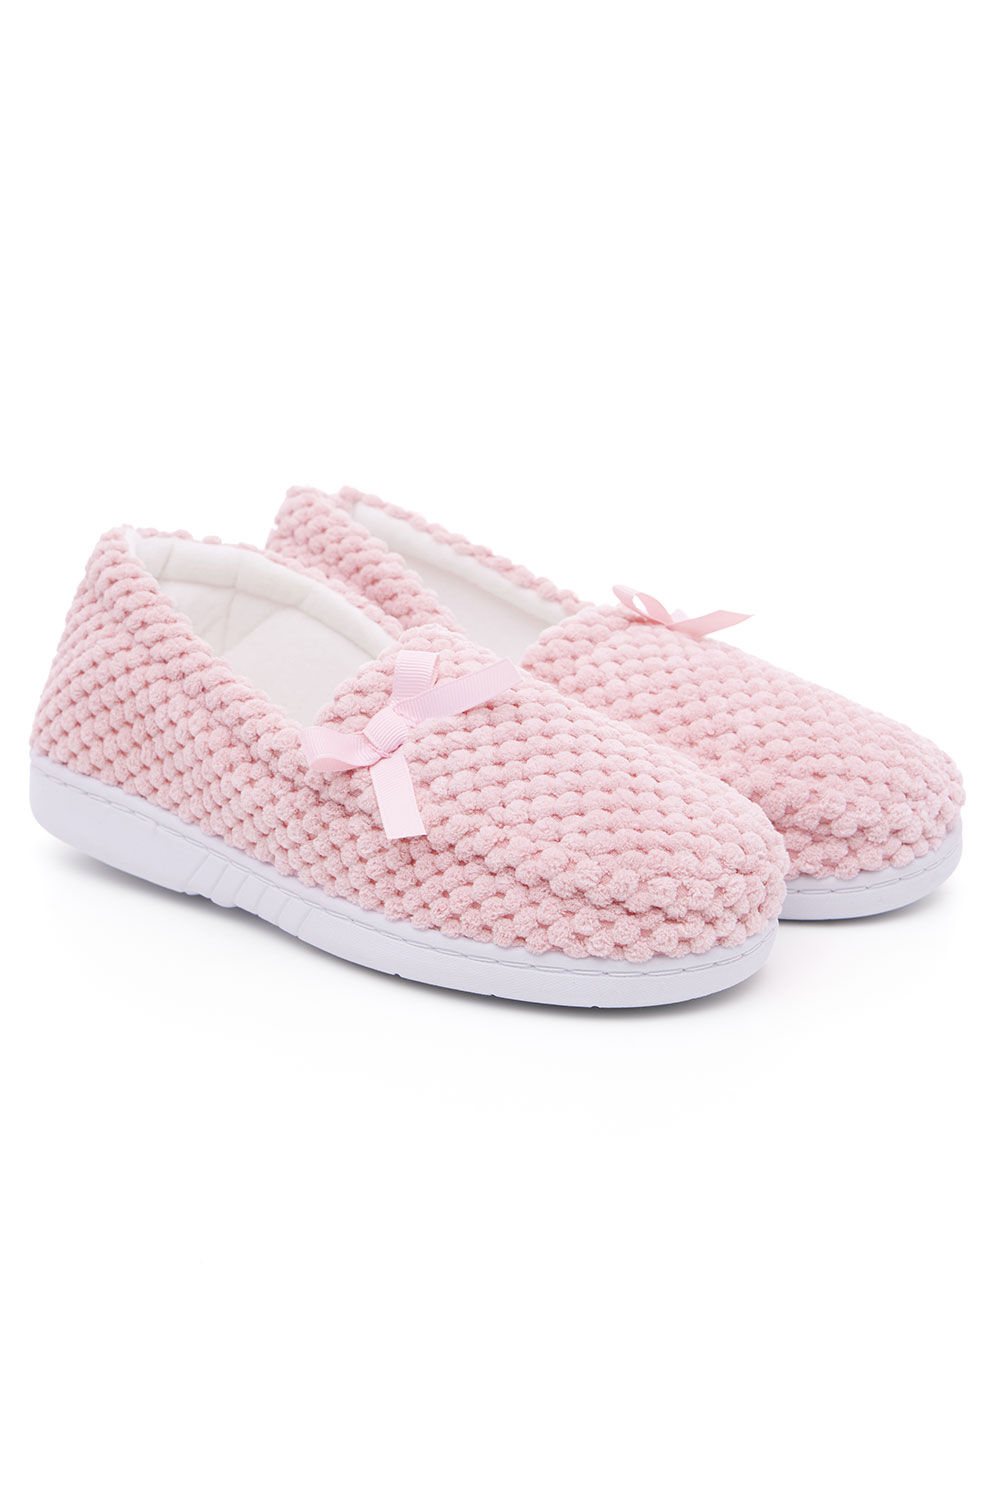 Bonmarche Pink Fleece Moccasin Slippers With Bow Detail, Size: 3